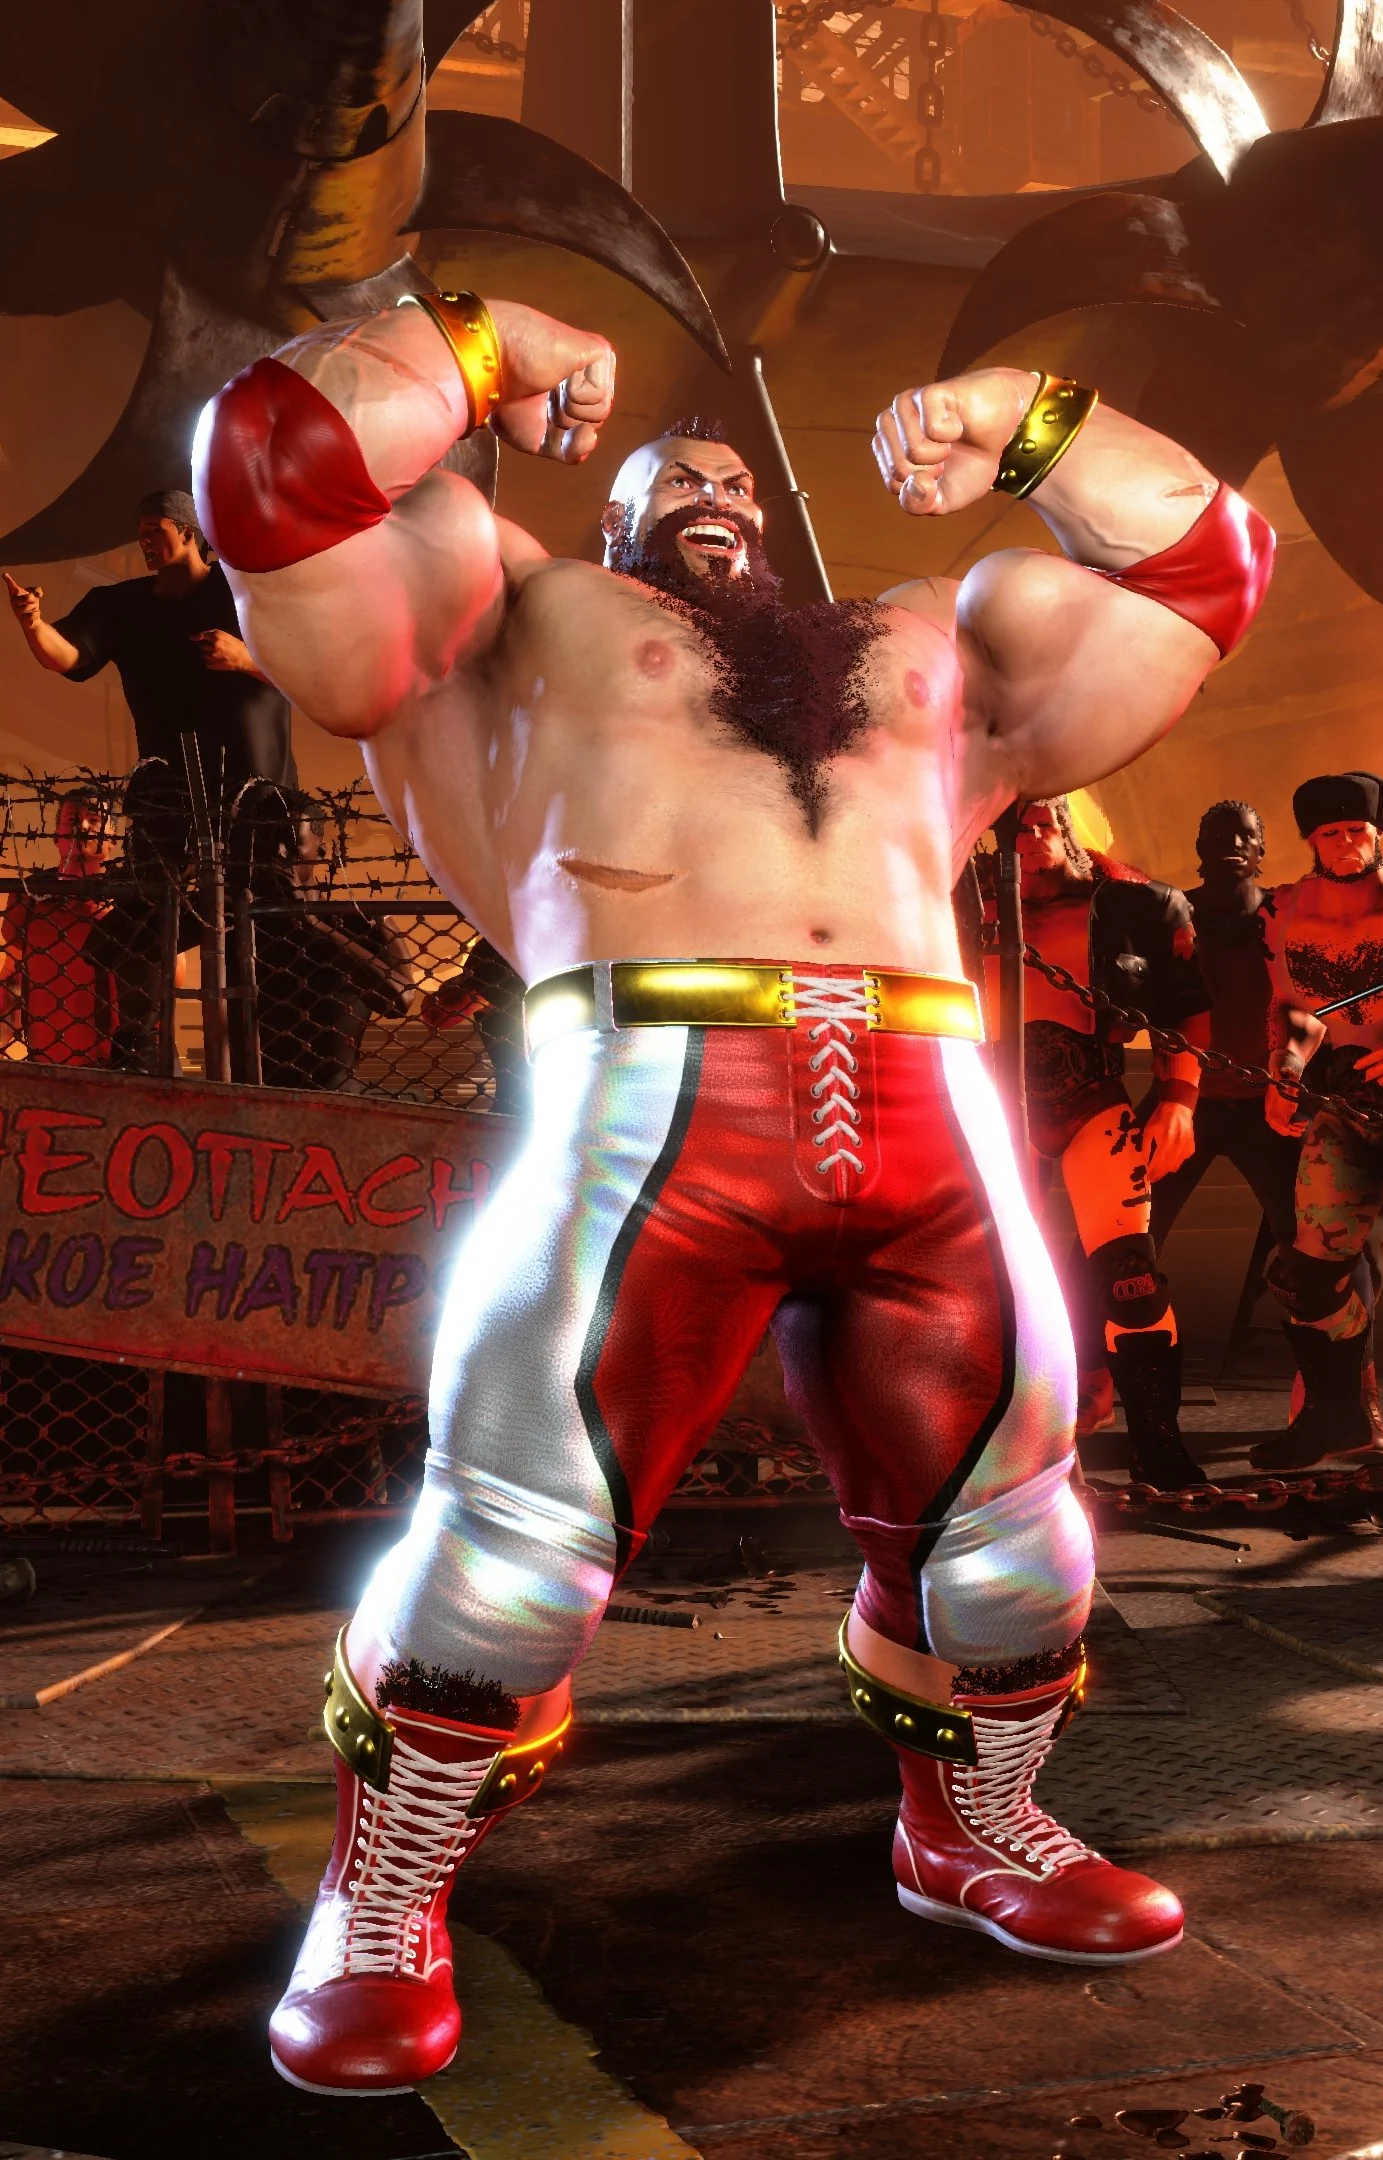 Who is Zangief in Street Fighter 6?